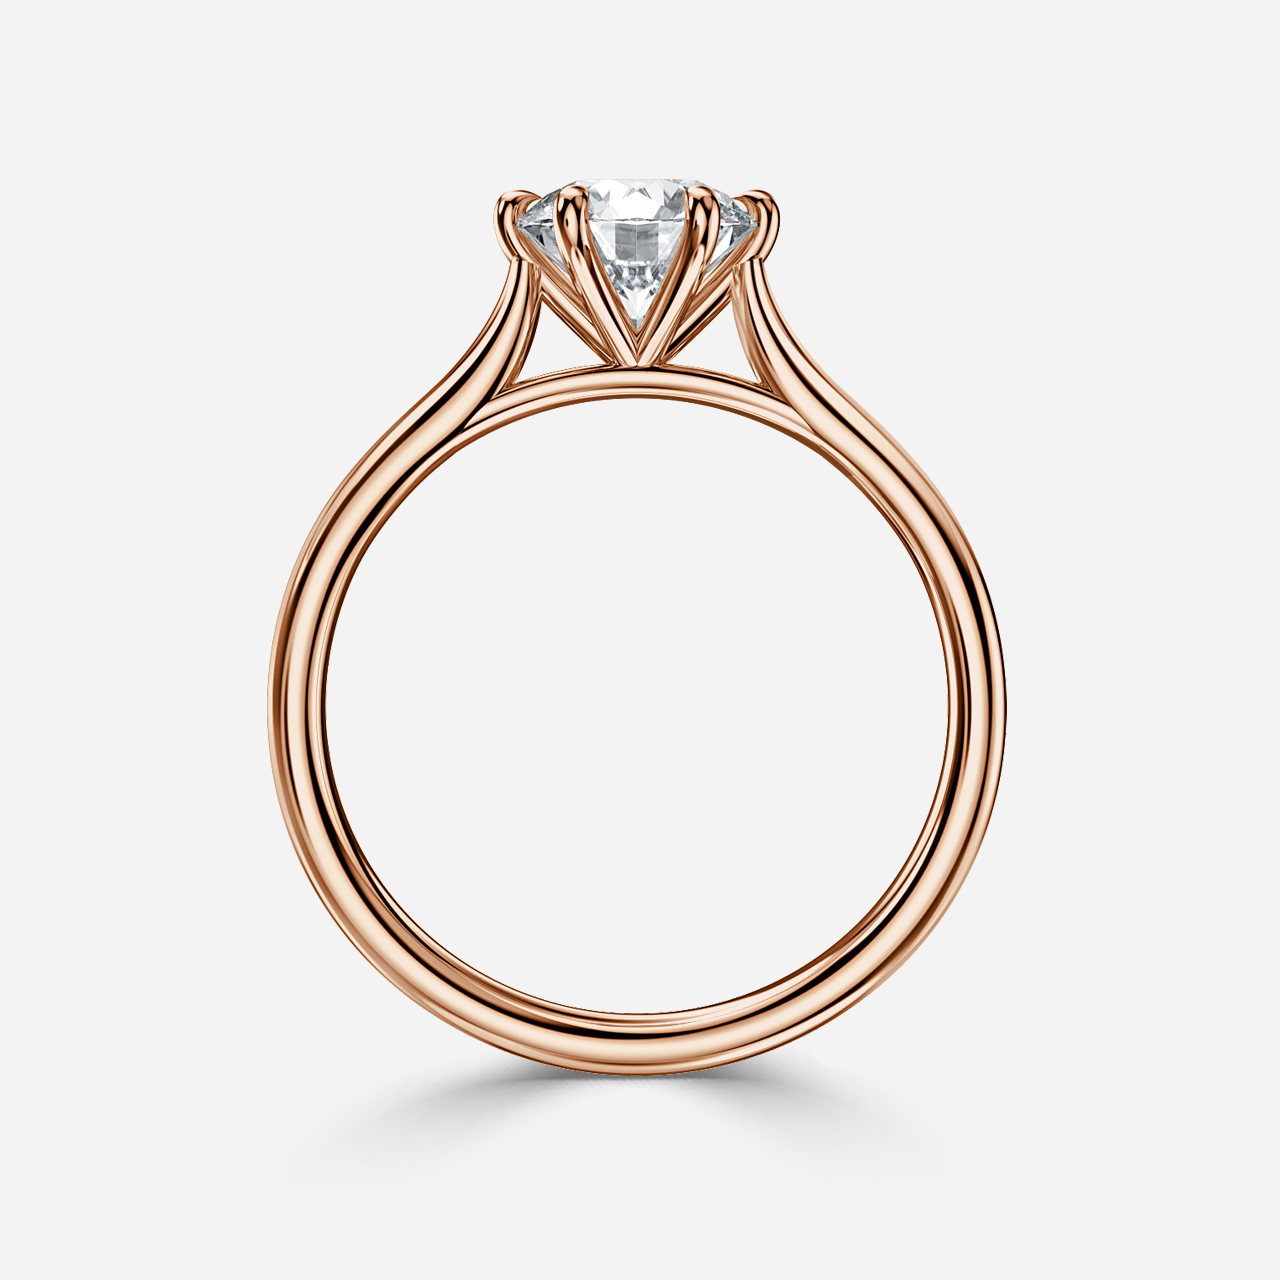 6 Prong Rose Gold Solitaire Engagement Ring Tapering Band